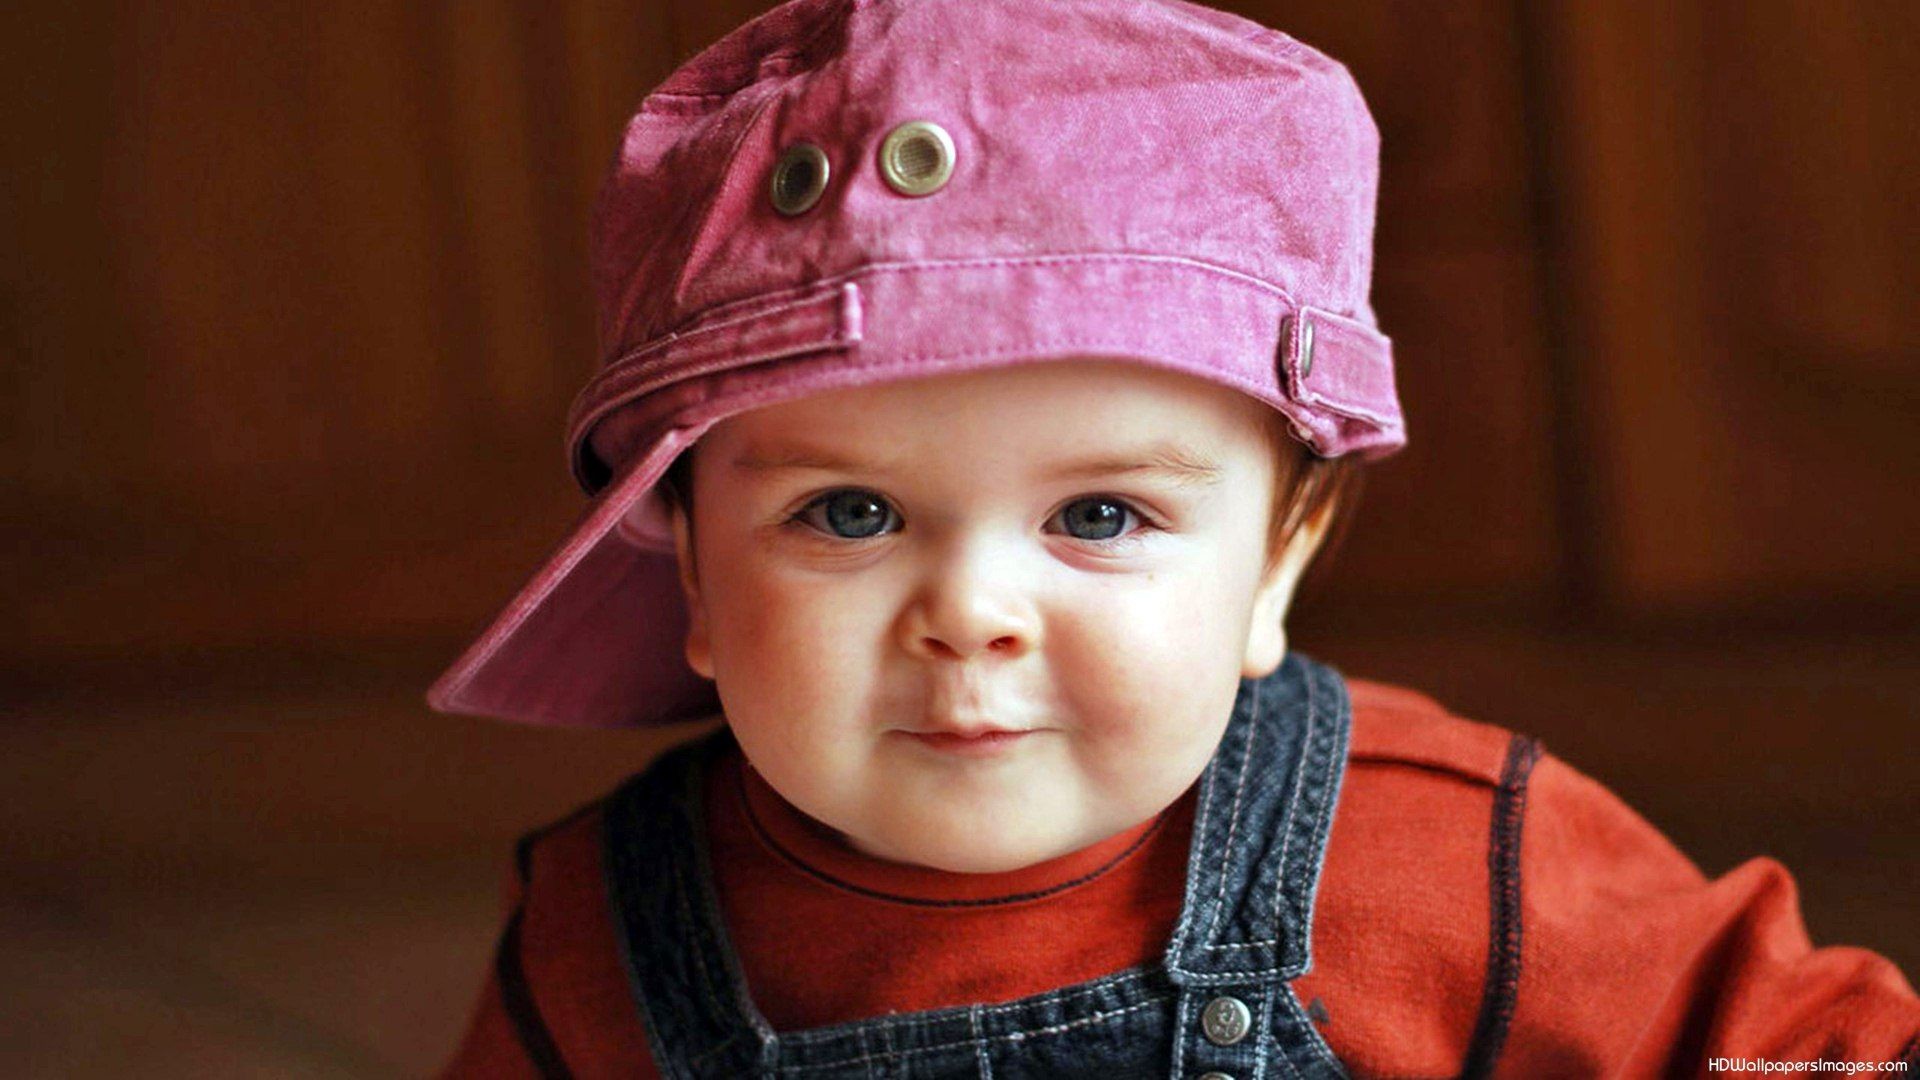 1920x1080 Collection of Baby Boy Wallpapers on HDWallpapers Cute Baby Boy Pics Wallpapers  Wallpapers)